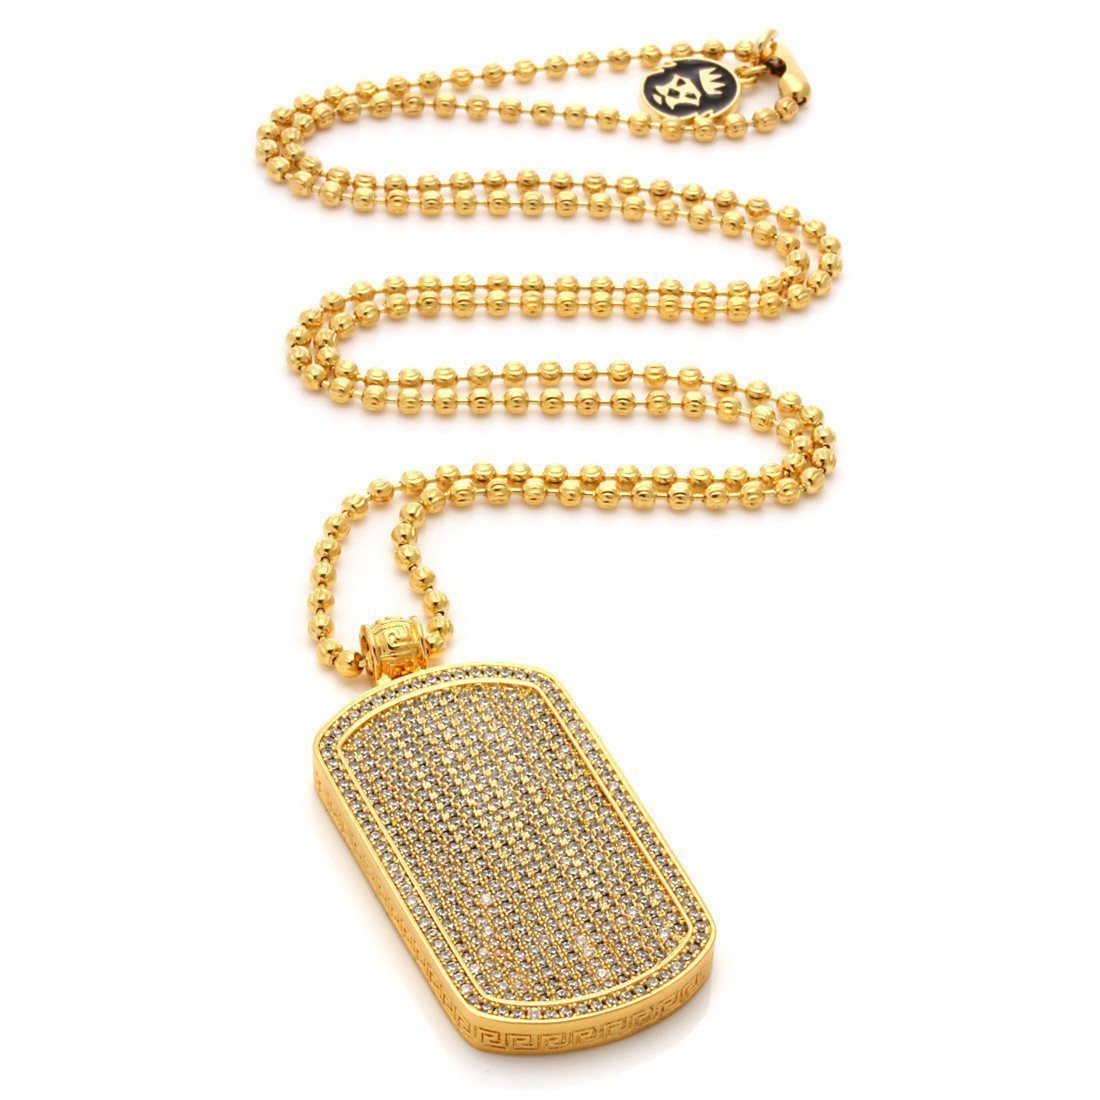 Snoop Dogg x King Ice - Dogg Tag Necklace